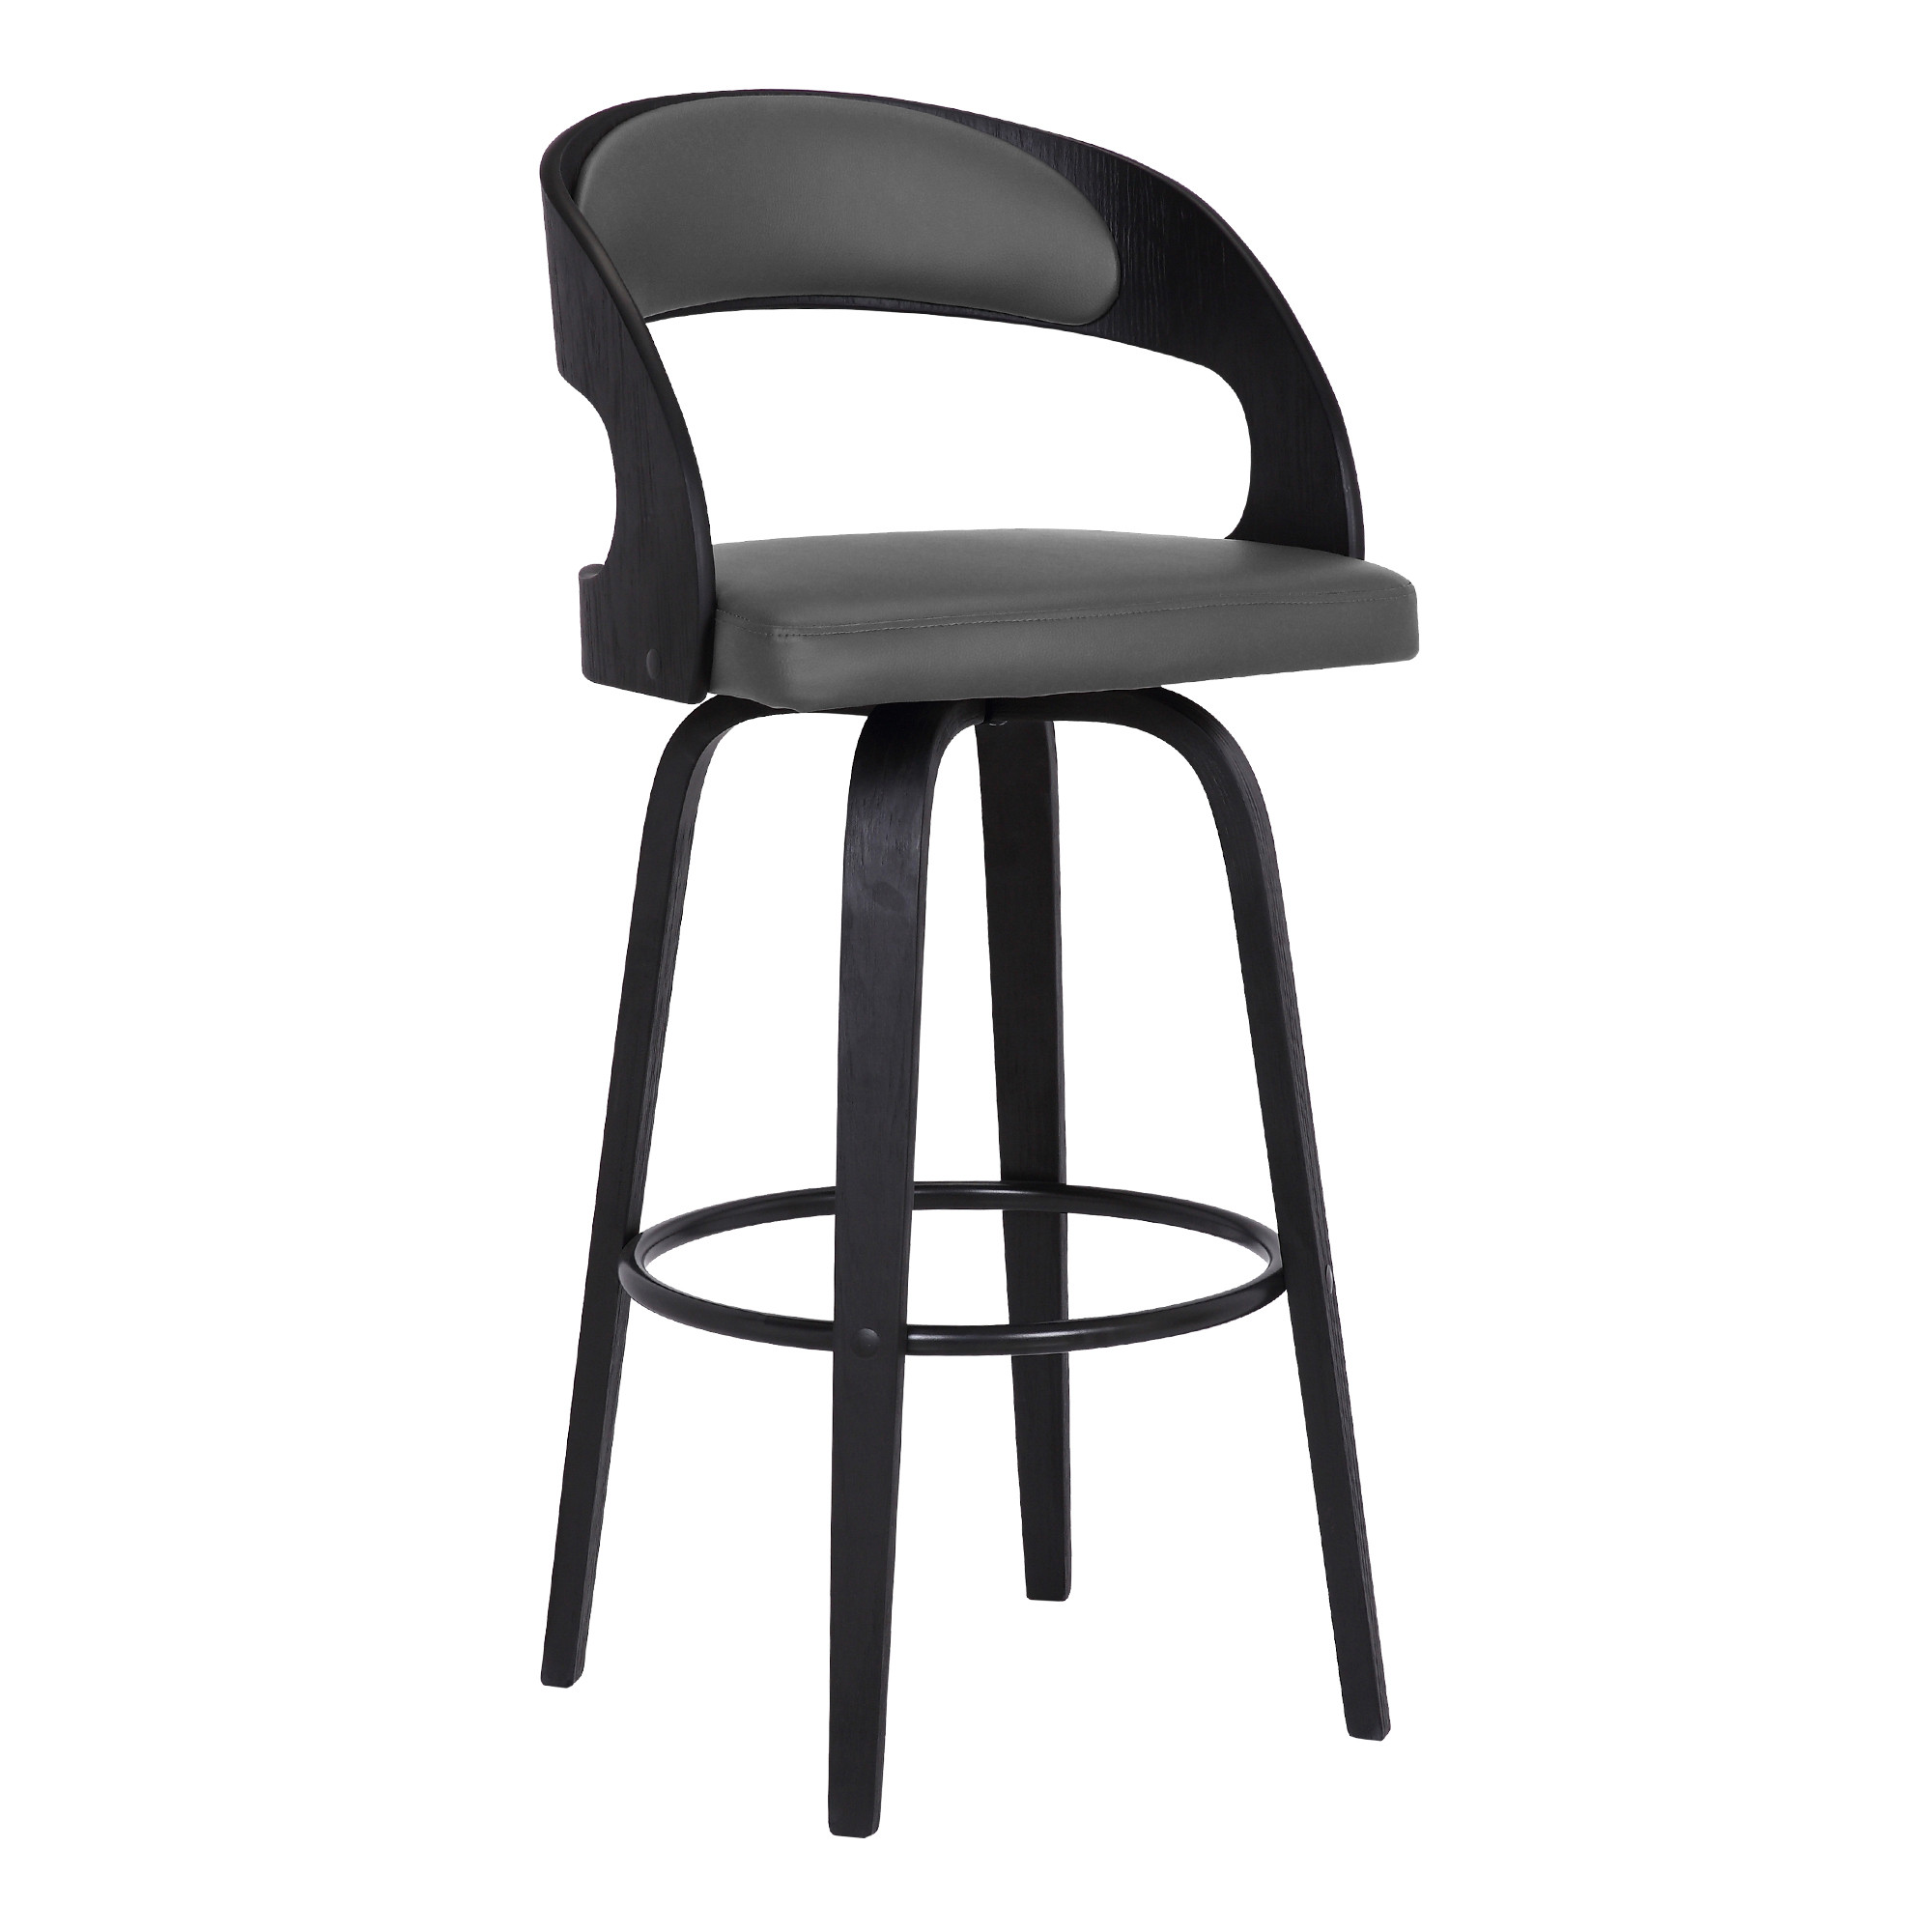 Gray Faux Leather Modern Black Wooden Bar Stool